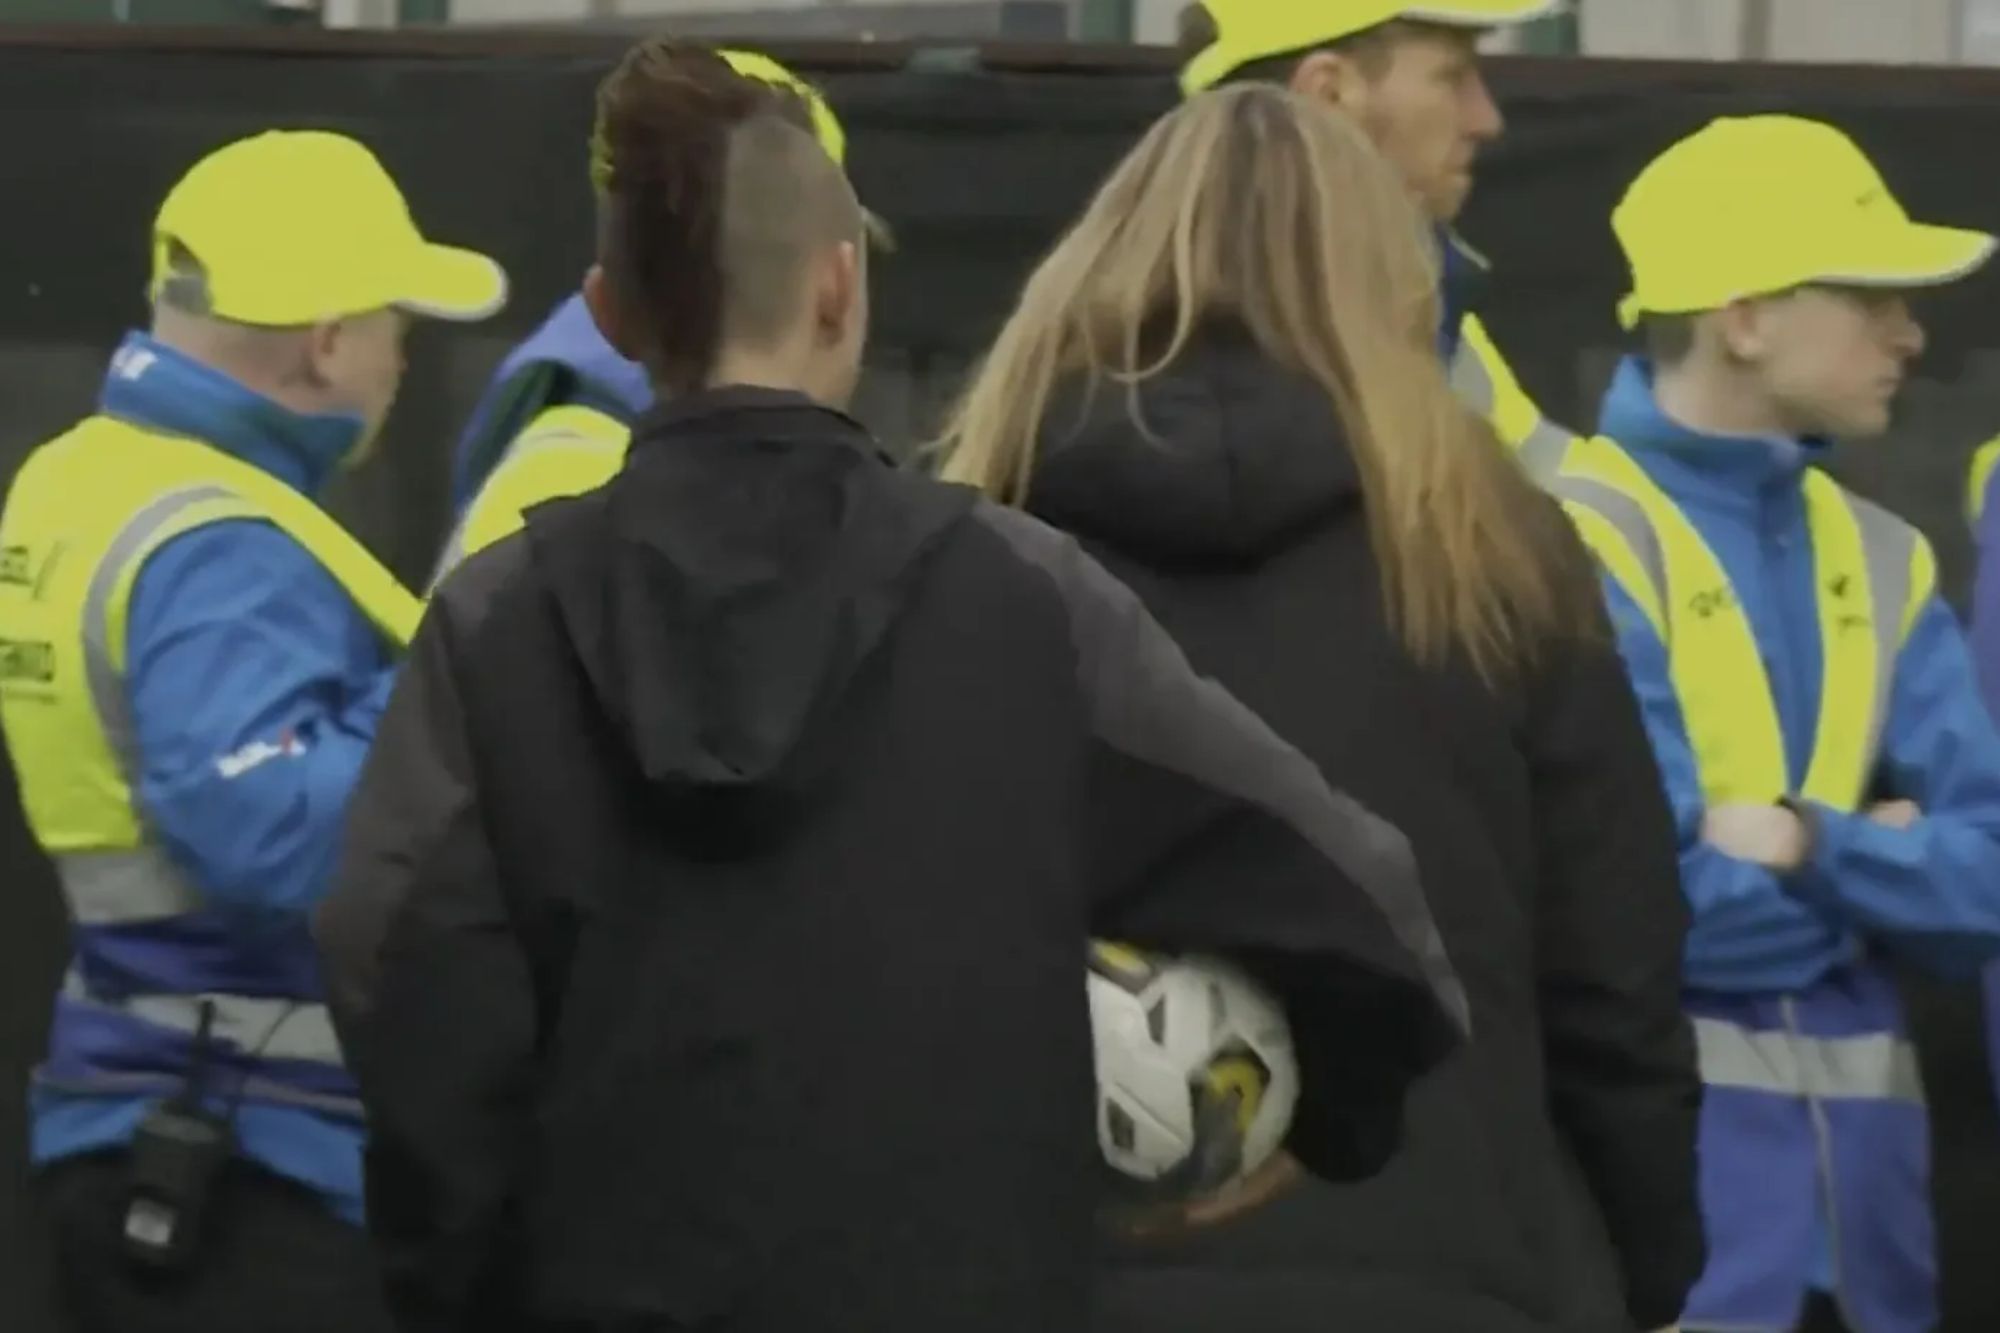 Moment St Mirren v Rangers BALLBOY subbed off for cheeky ball throw